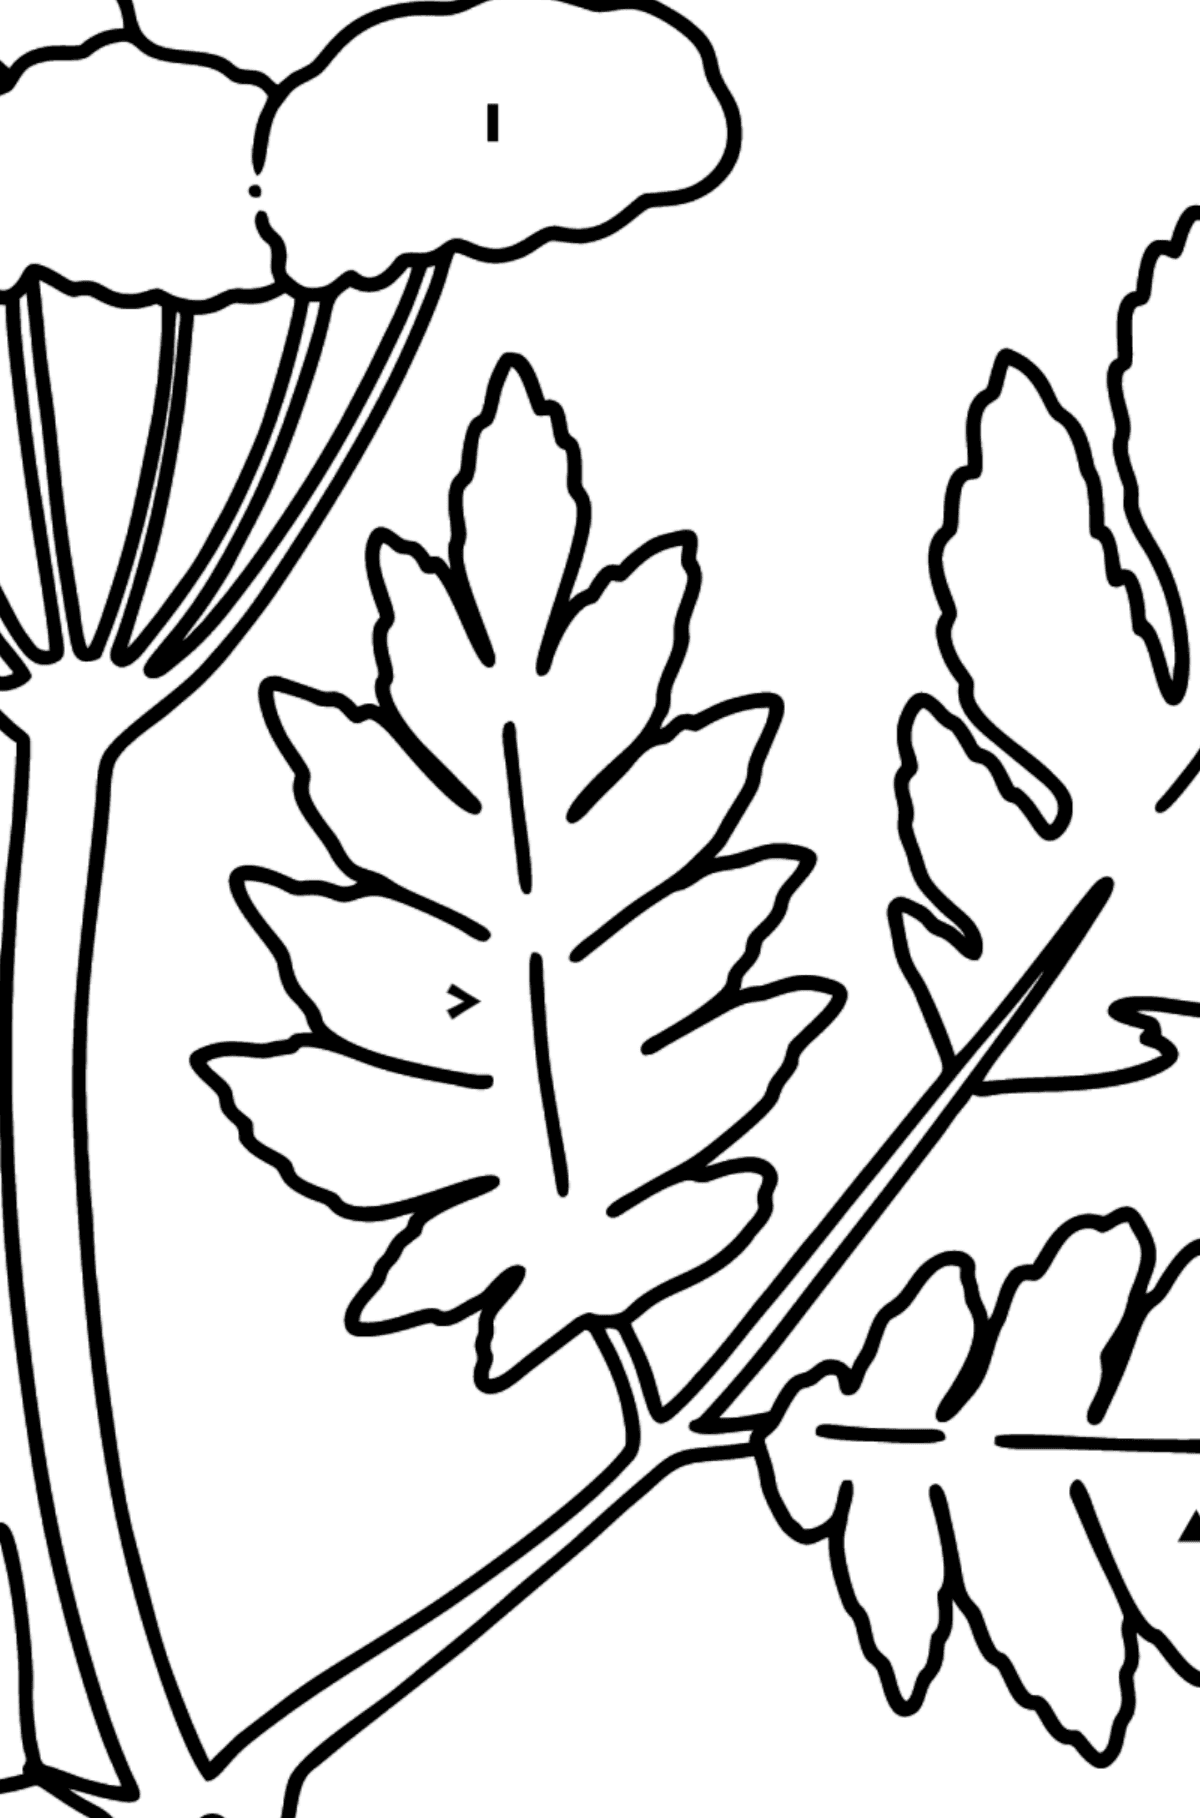 Hemlock coloring page - Coloring by Symbols for Kids